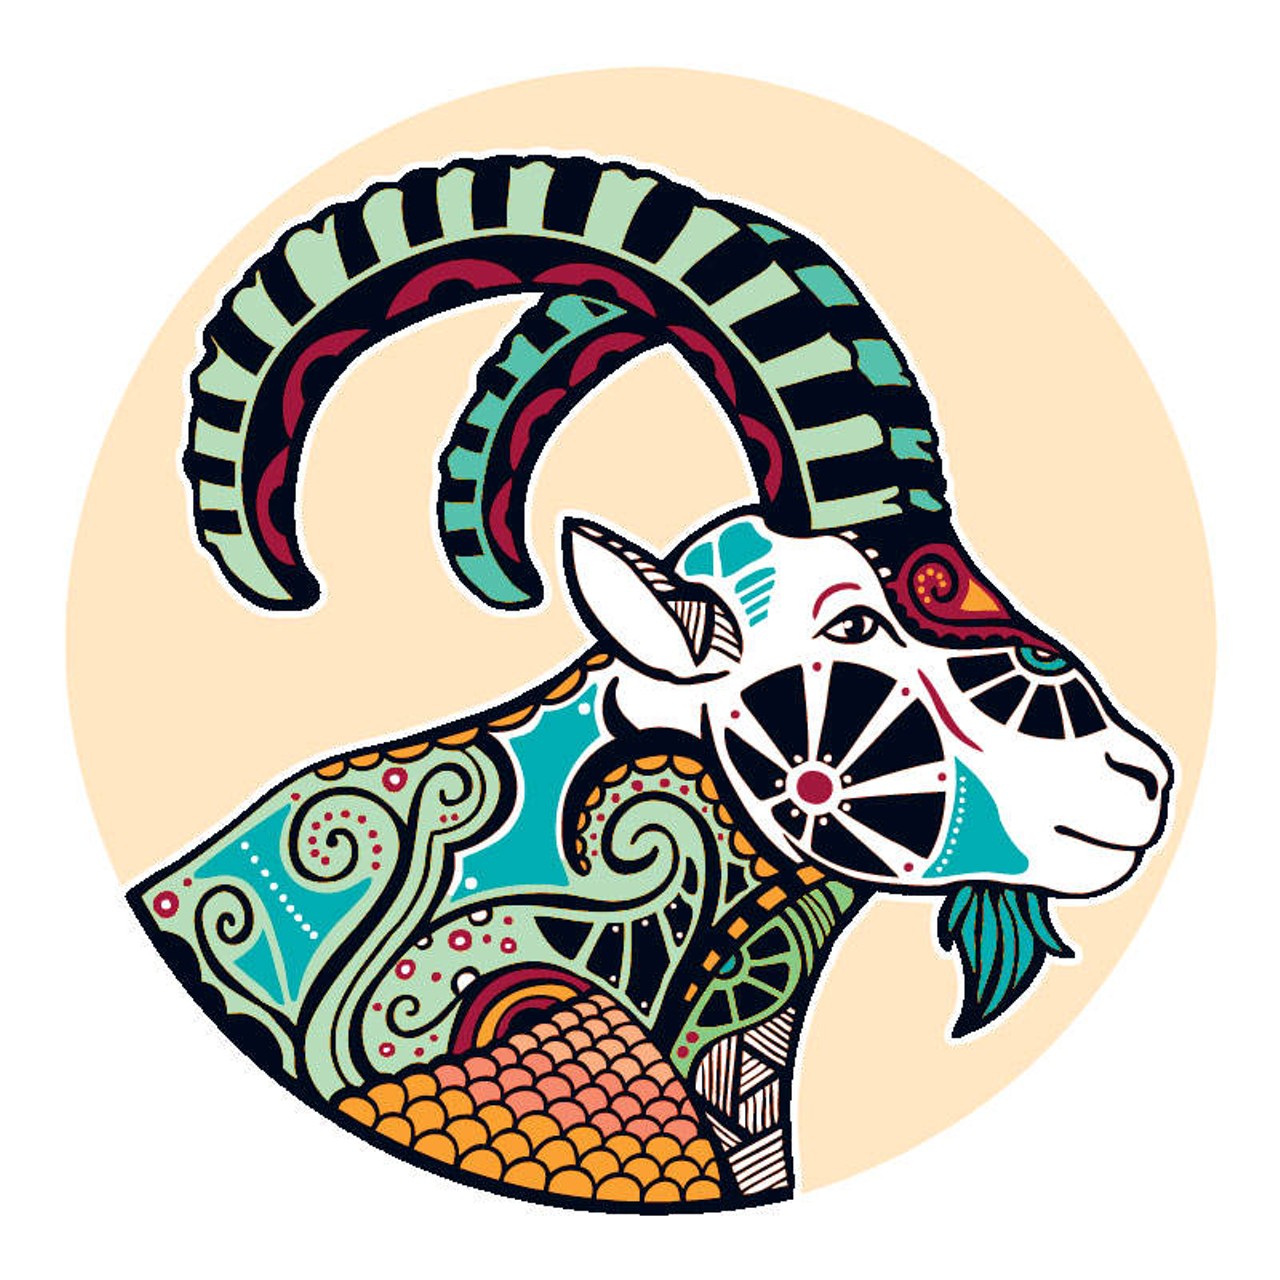 CAPRICORN (Dec. 21-Jan. 20):
Holding your horses was never your cup of tea. Caught in the crossfire of other, larger, more pressing interests, you've been forced to idle, waiting for others to figure out where they want to take this. In your mind, the sky is the limit. That concept looks good on paper but you're trying to get it to work with people whose real agendas have very little to do with what's on your plate. And what's up their sleeve could wind up costing you a fortune in time and money, not to mention your reputation. Be grateful that there is a lull in the action; it could save your life.